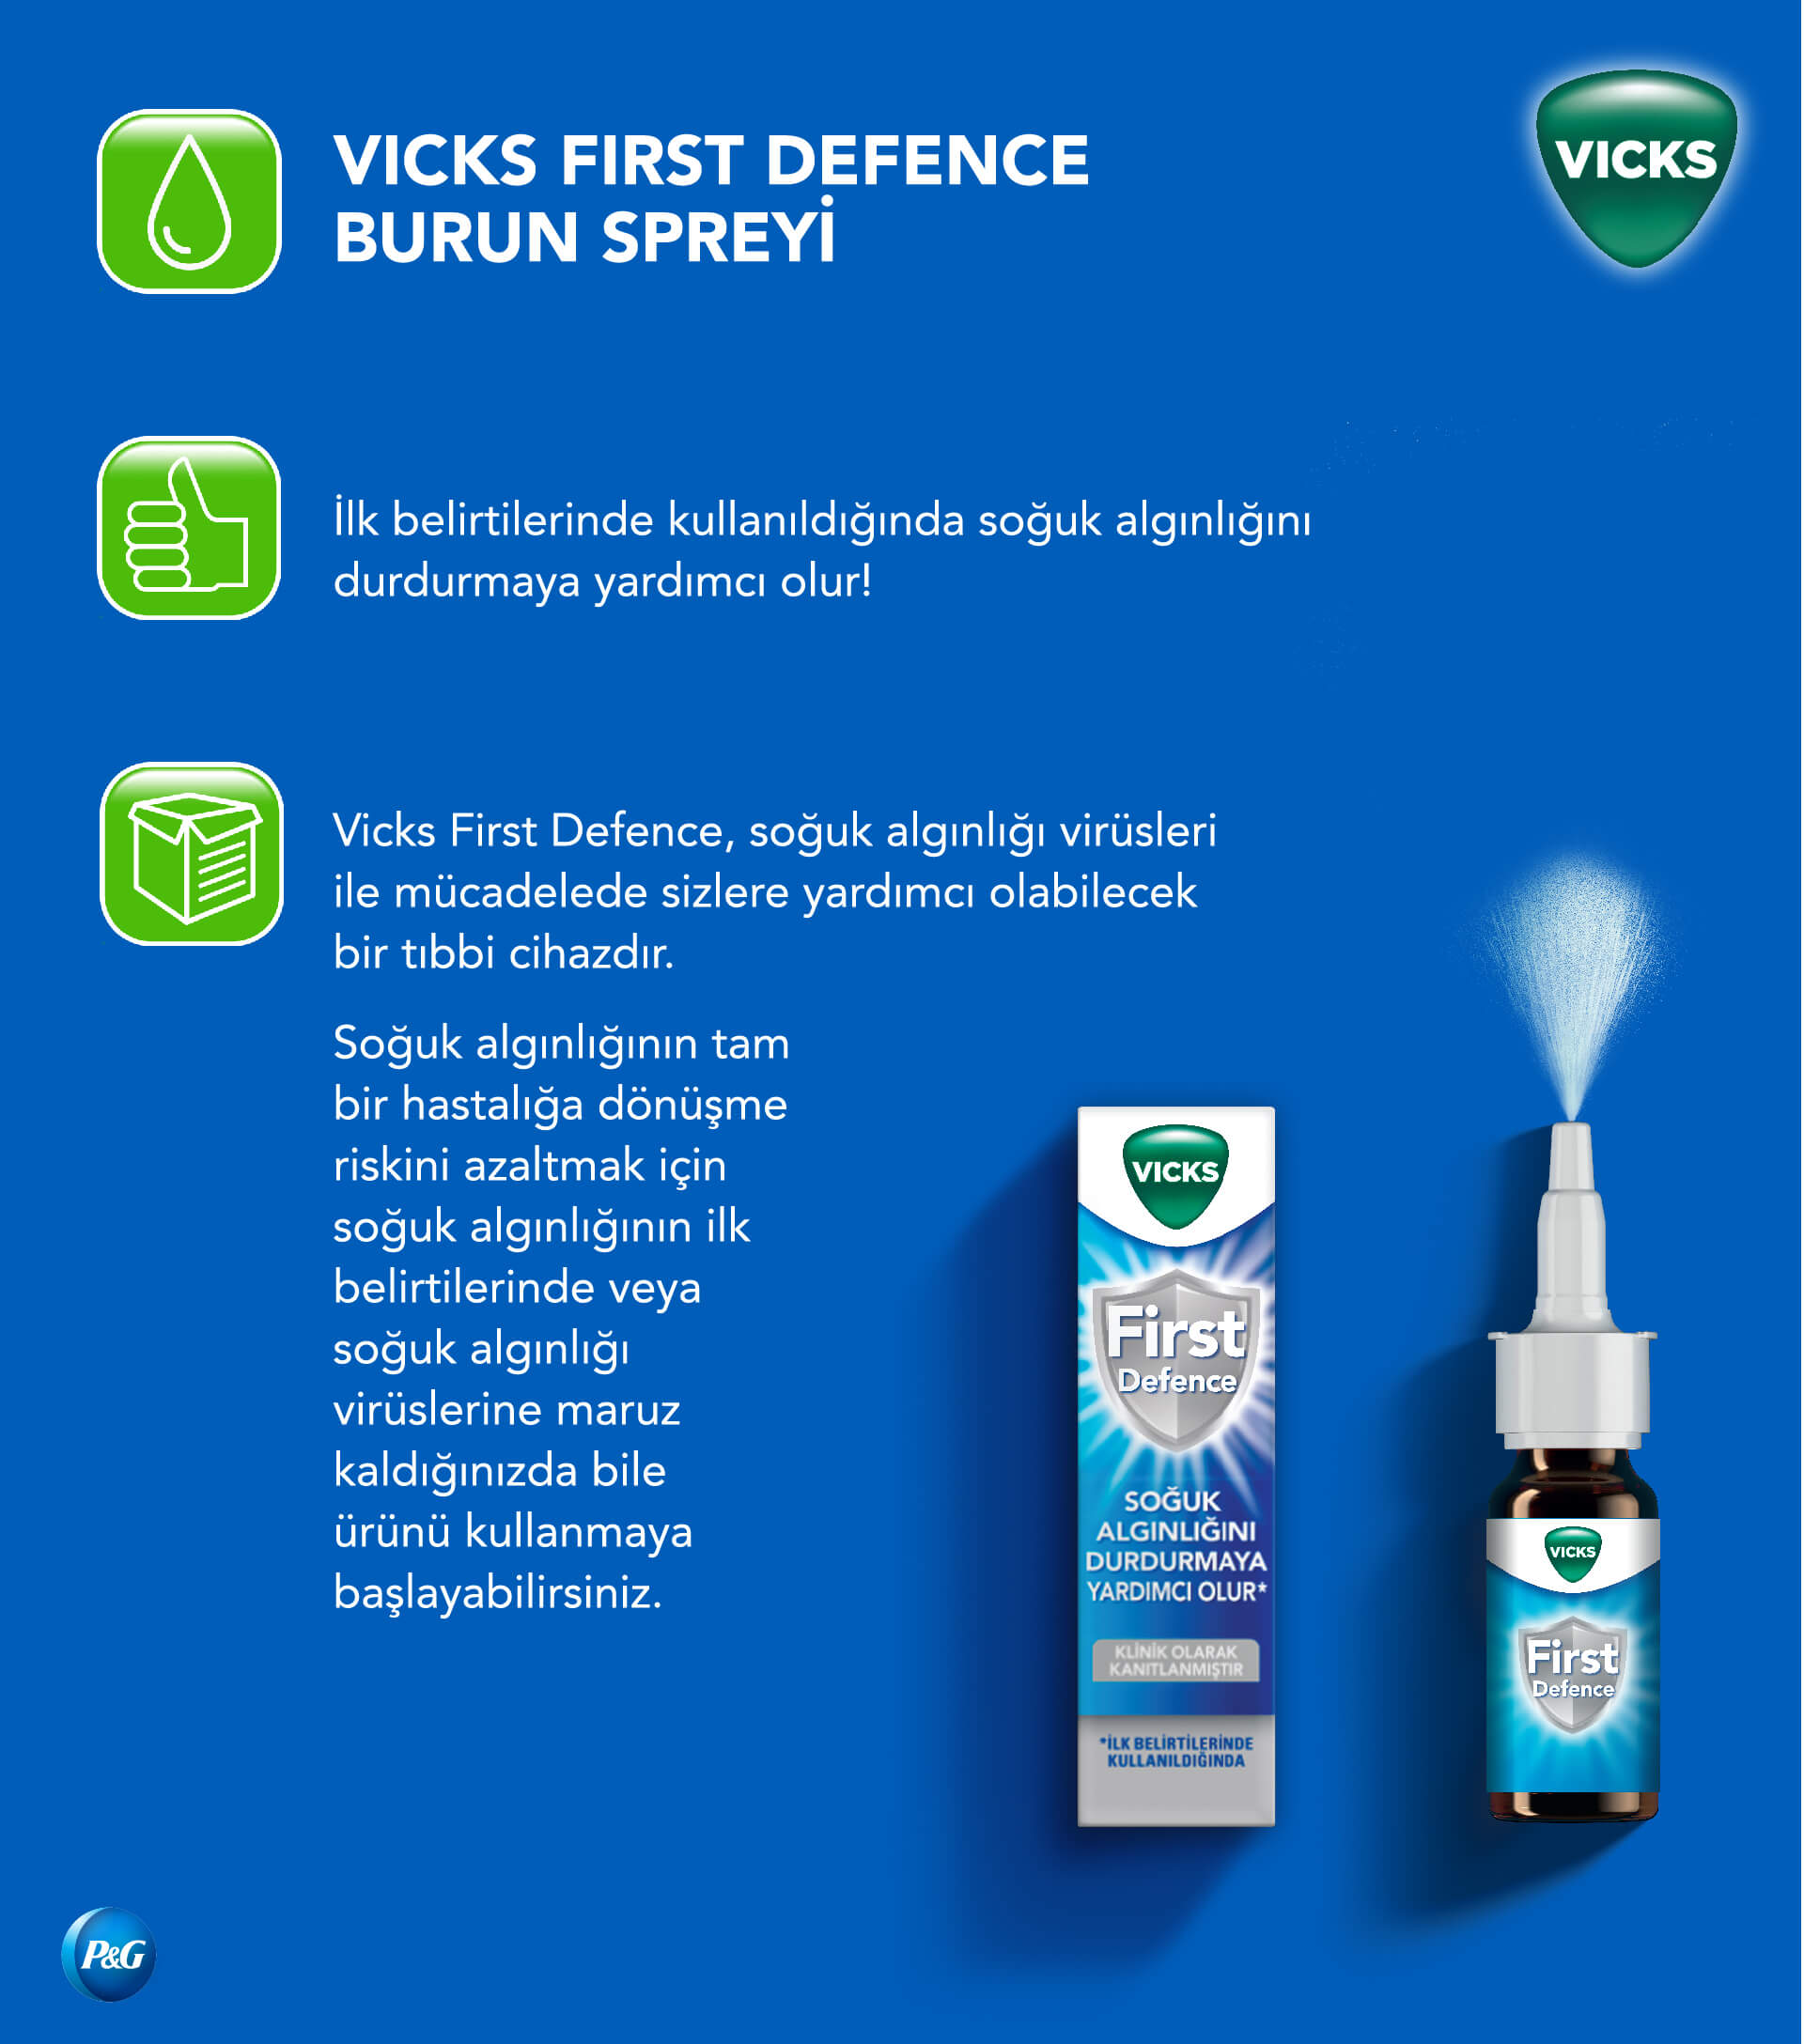 Vicks first defence